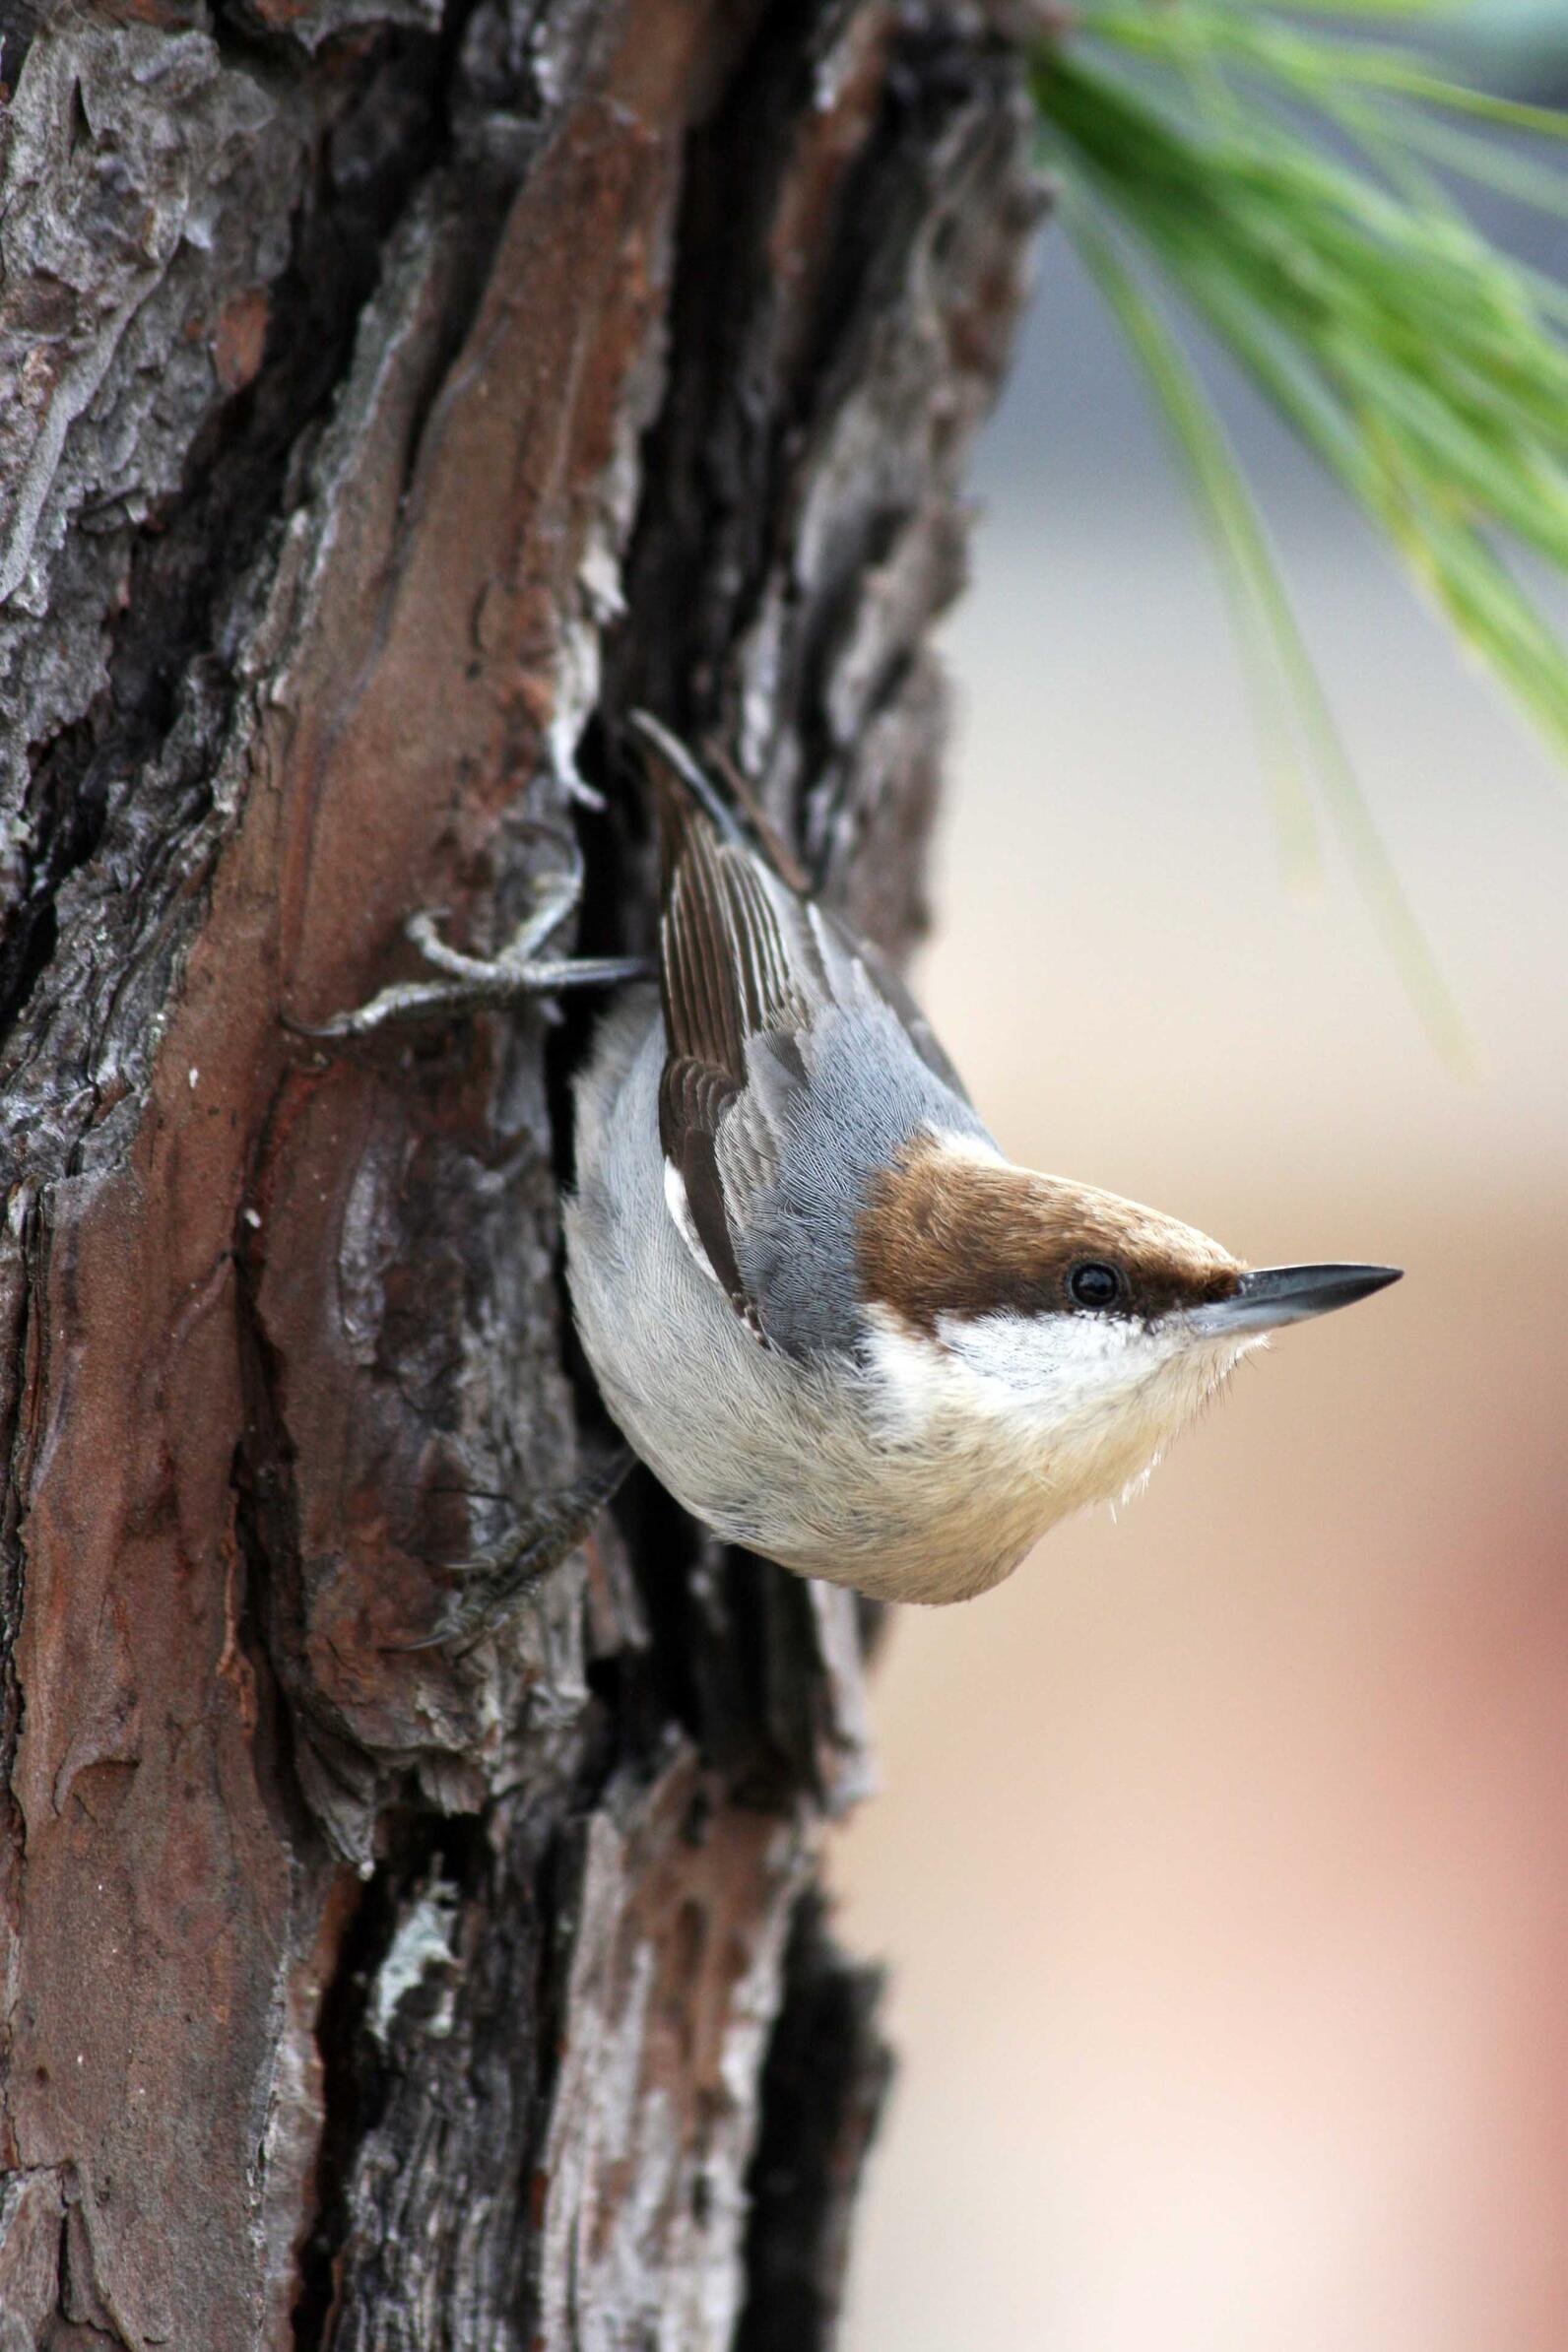 A brown-headed nuthatch walks down the trunk of a tree.